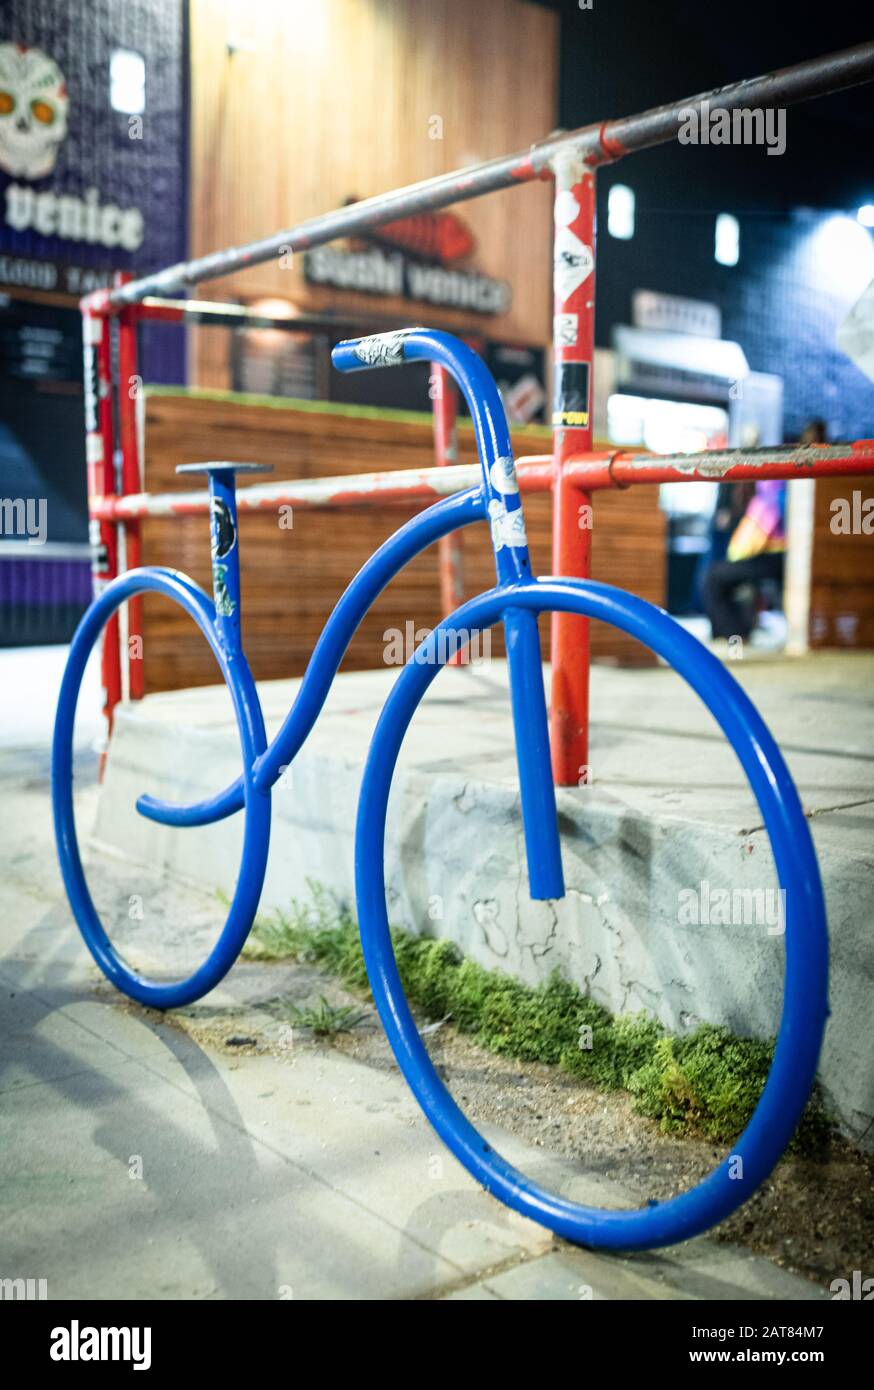 A modern art installation in Venice, California featuring a colorful bike in front of a fence and stores. Stock Photo